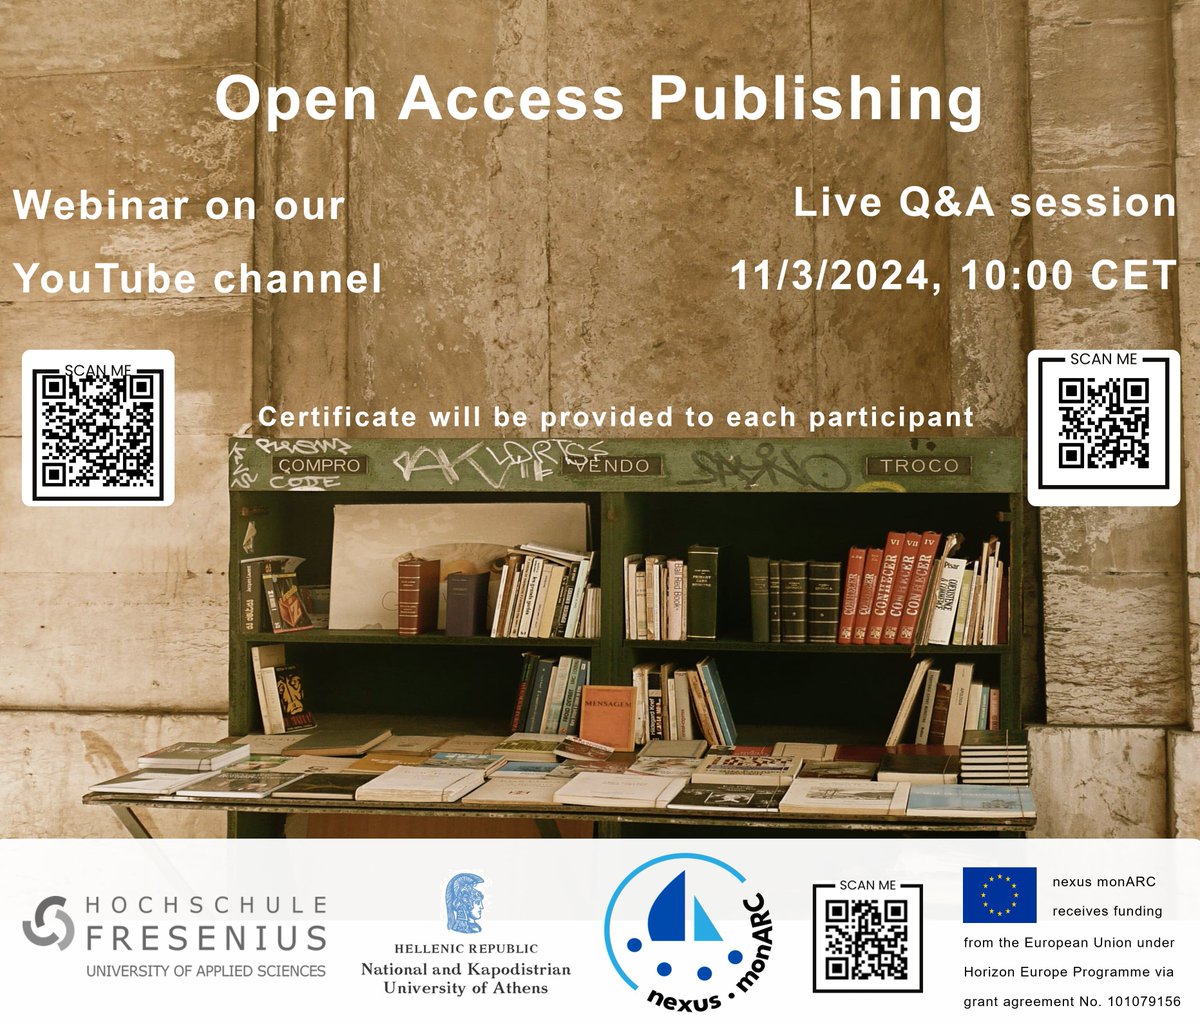 Do you have questions about open access publishing? Sign up for our Q&A session and watch the webinar on our YouTube channel!